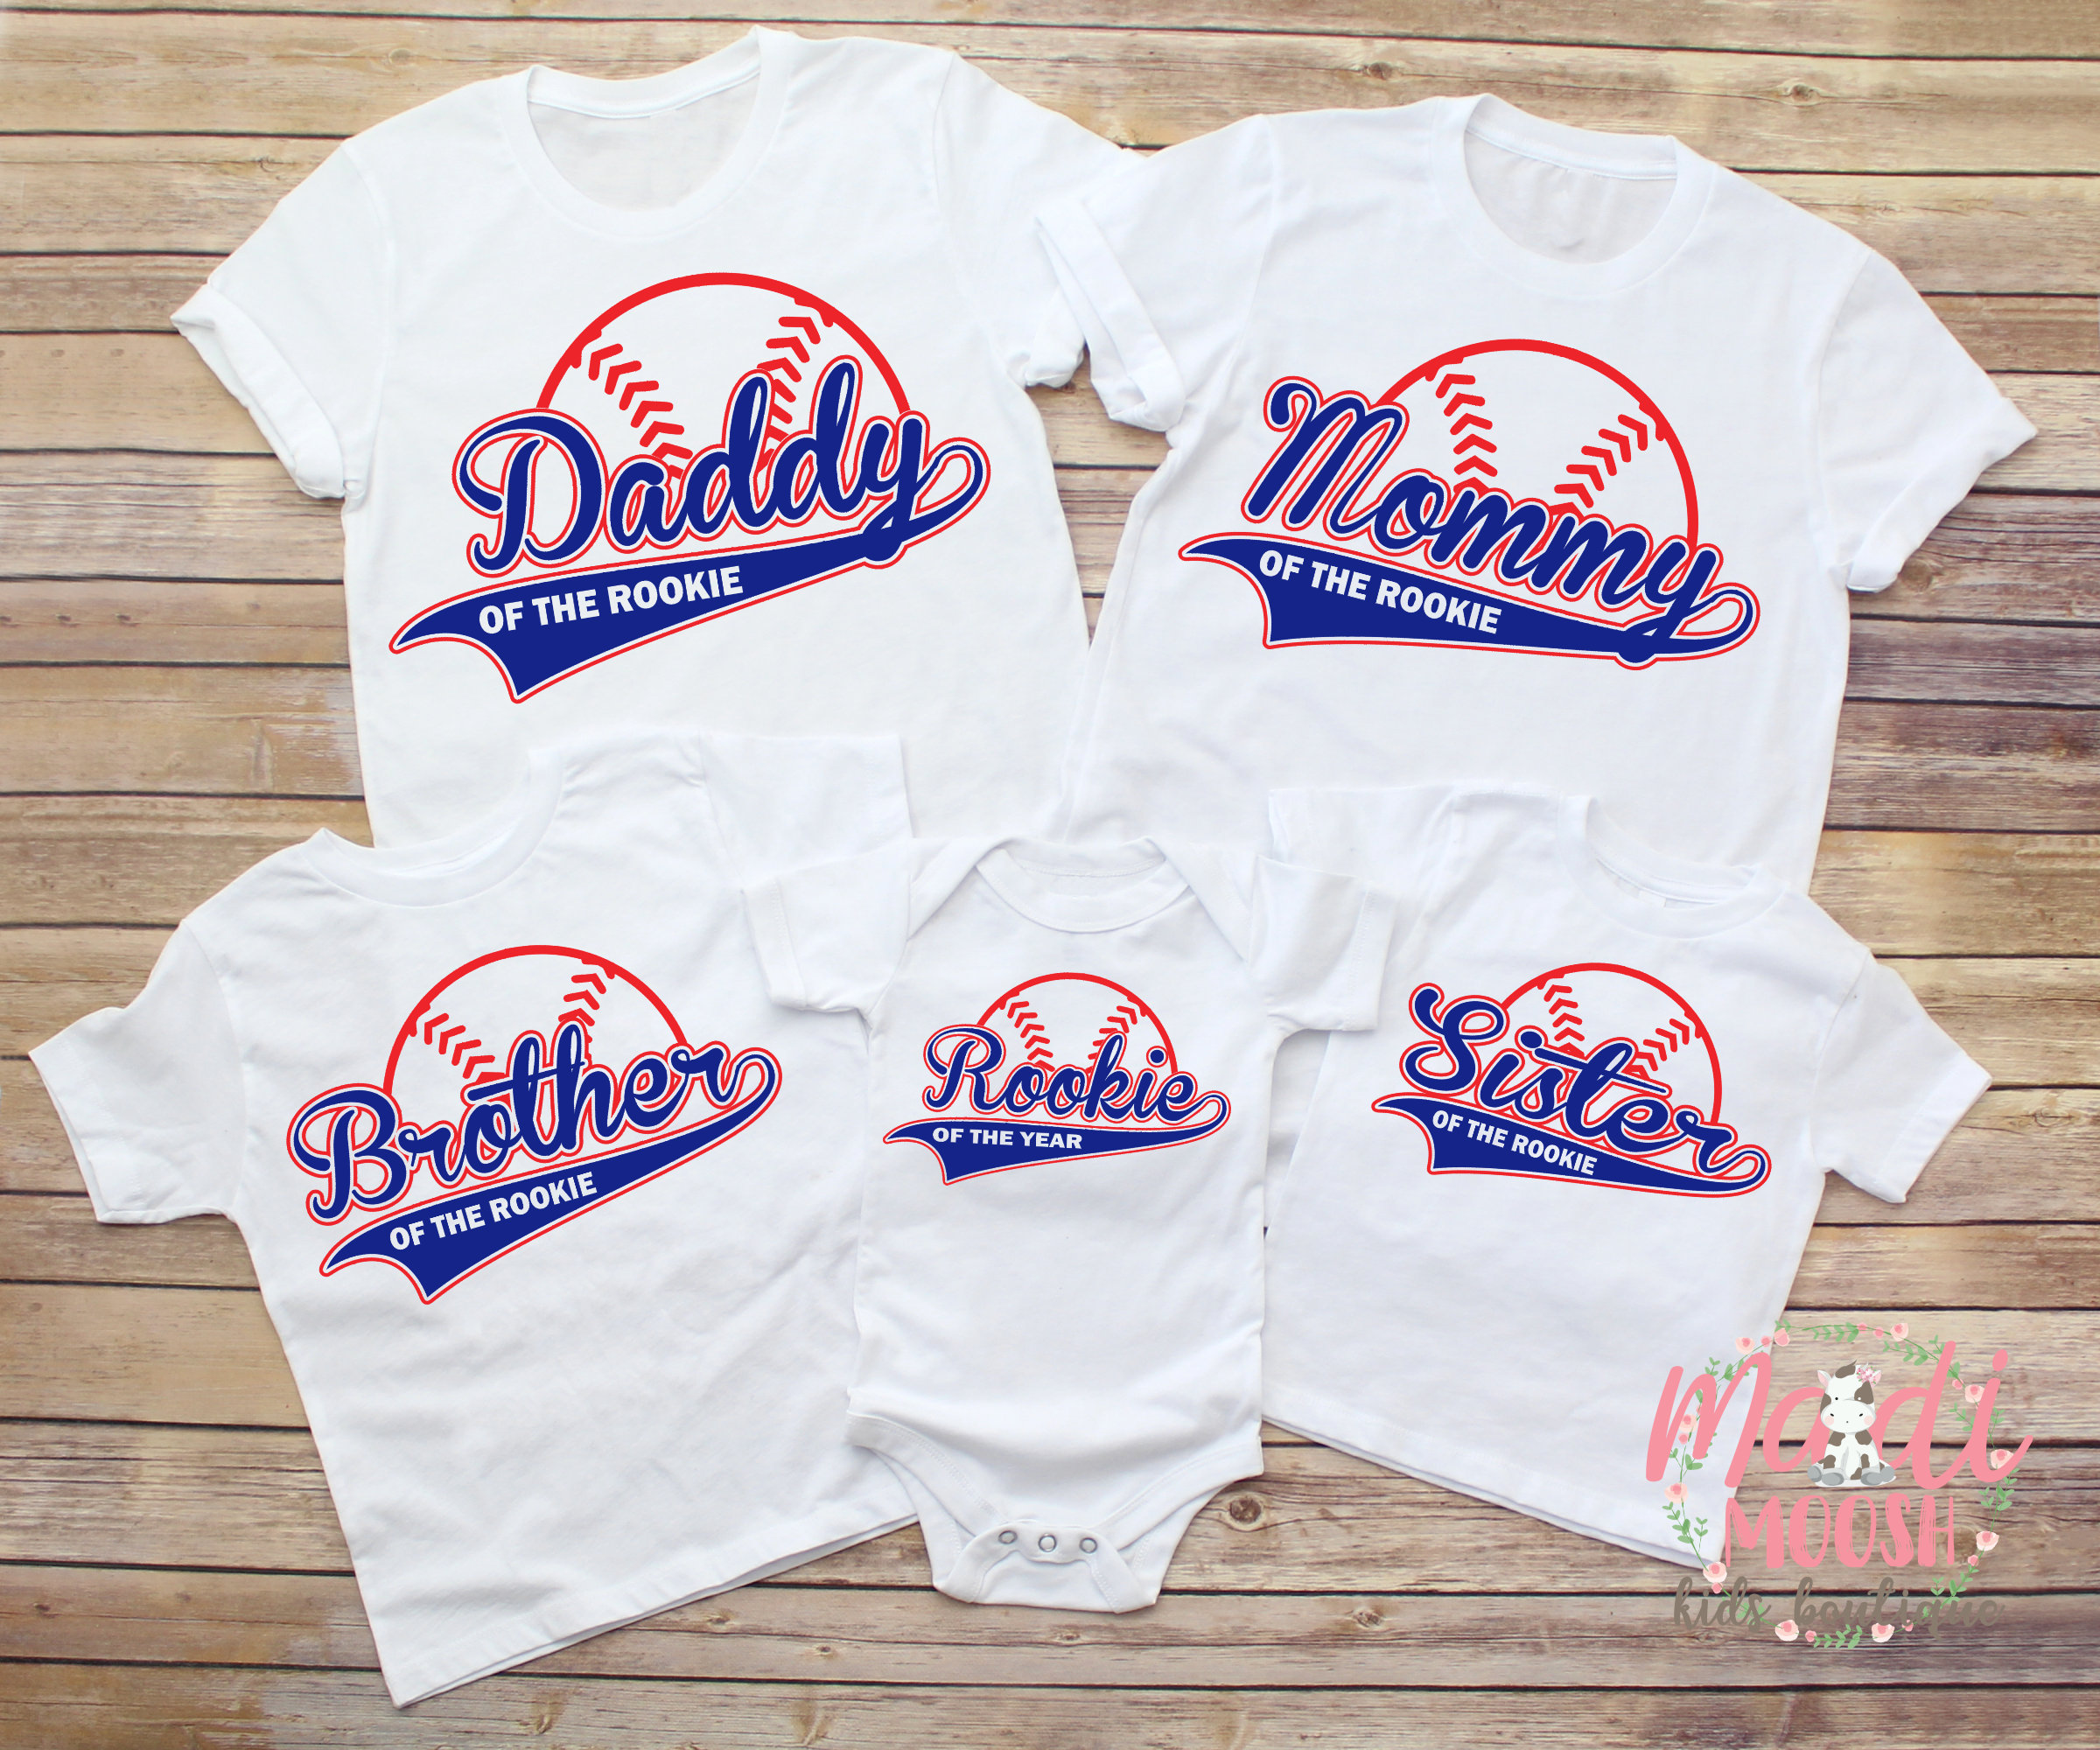 MadiMooshBoutique Family Rookie of The Year Birthday Shirts, Baseball Birthday Shirt, Rookie of The Year Birthday Shirt, Boy Birthday Shirt, Matching Birthday